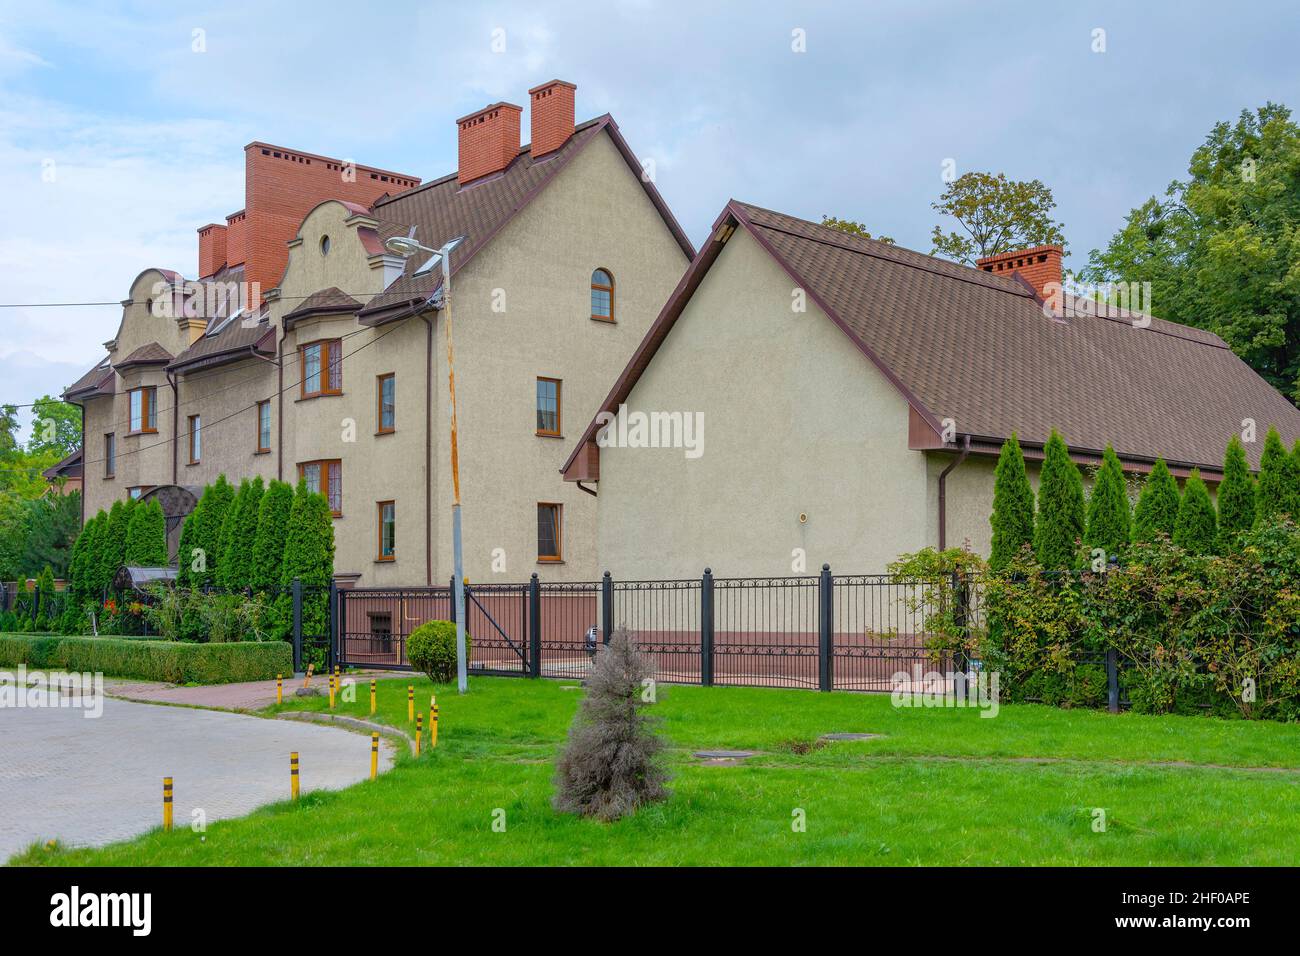 Kaliningrad, a three-storey private residential building with a well-groomed garden plot Stock Photo